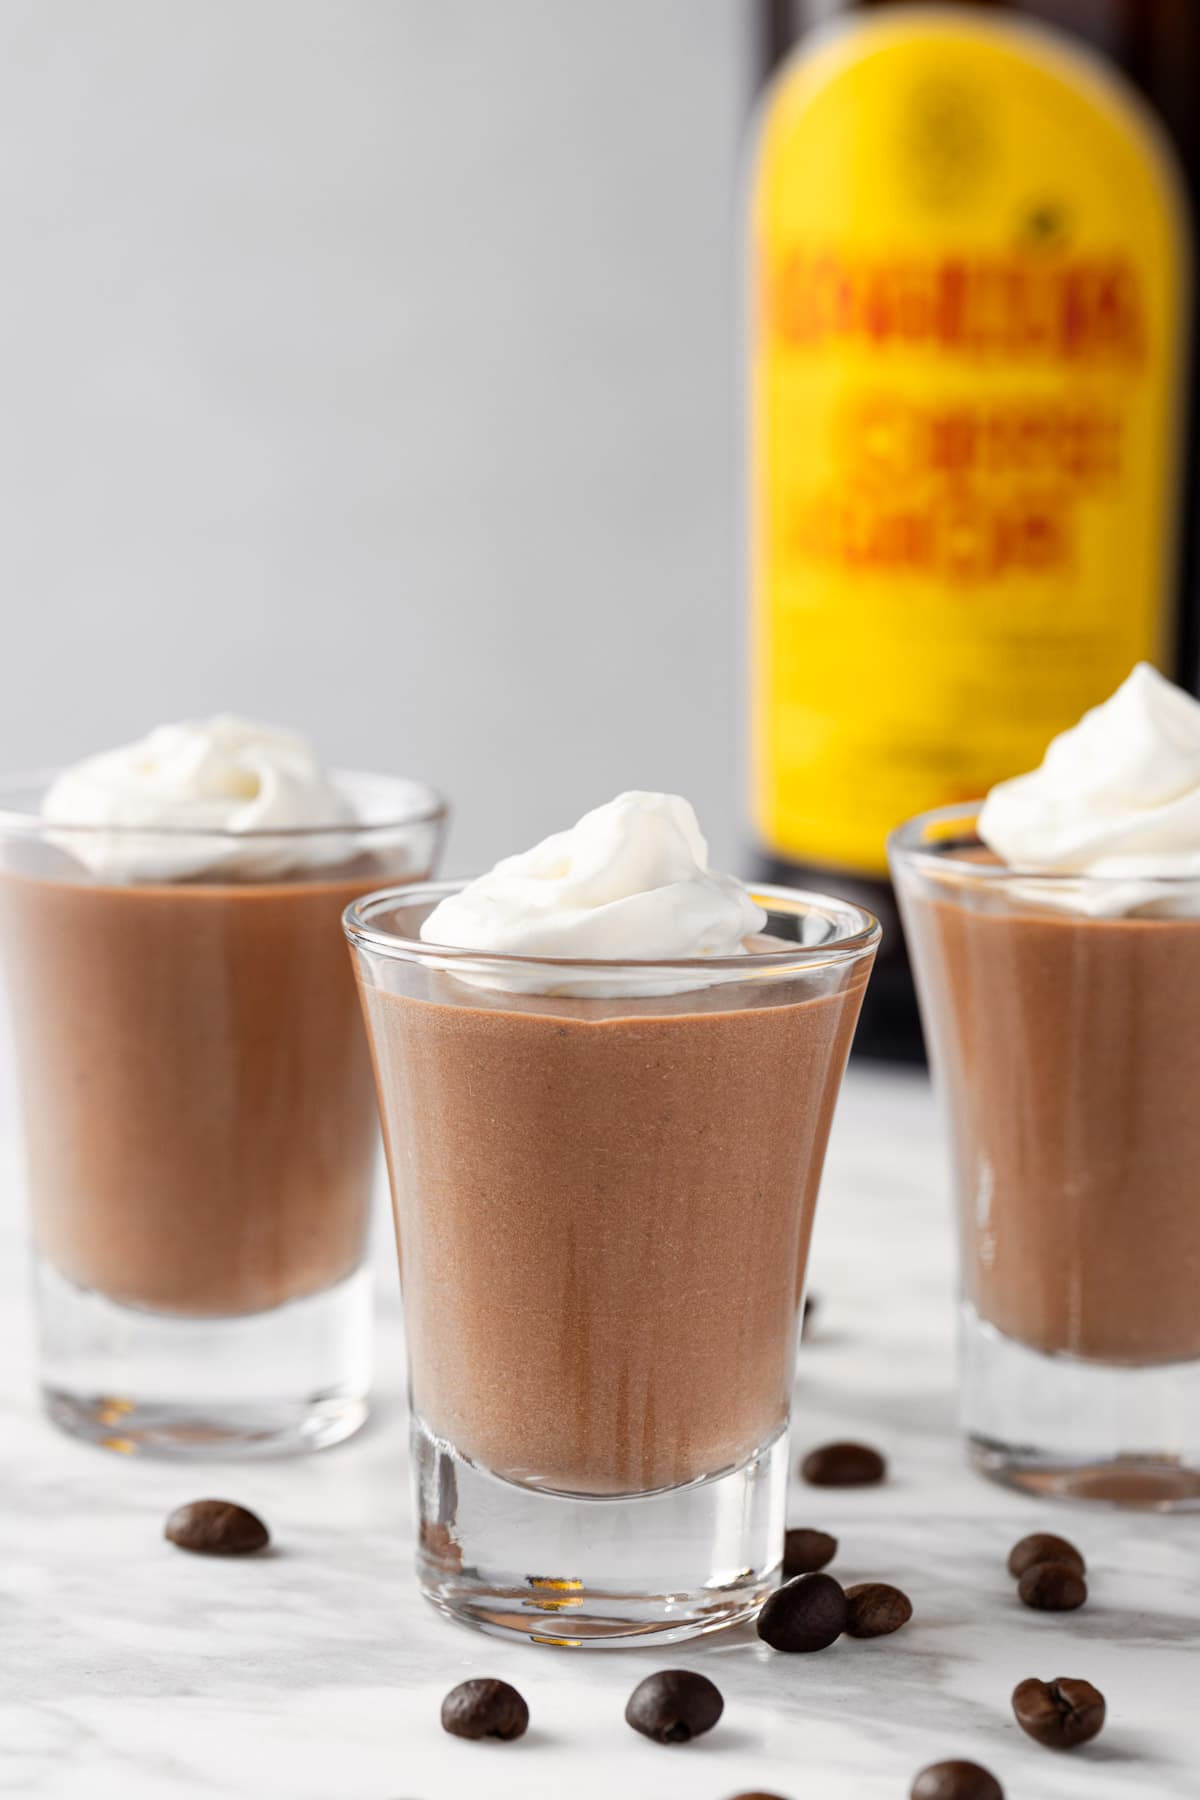 Three Kahlua Pudding Shots topped with whipped cream and a Kahlua bottle in the background.